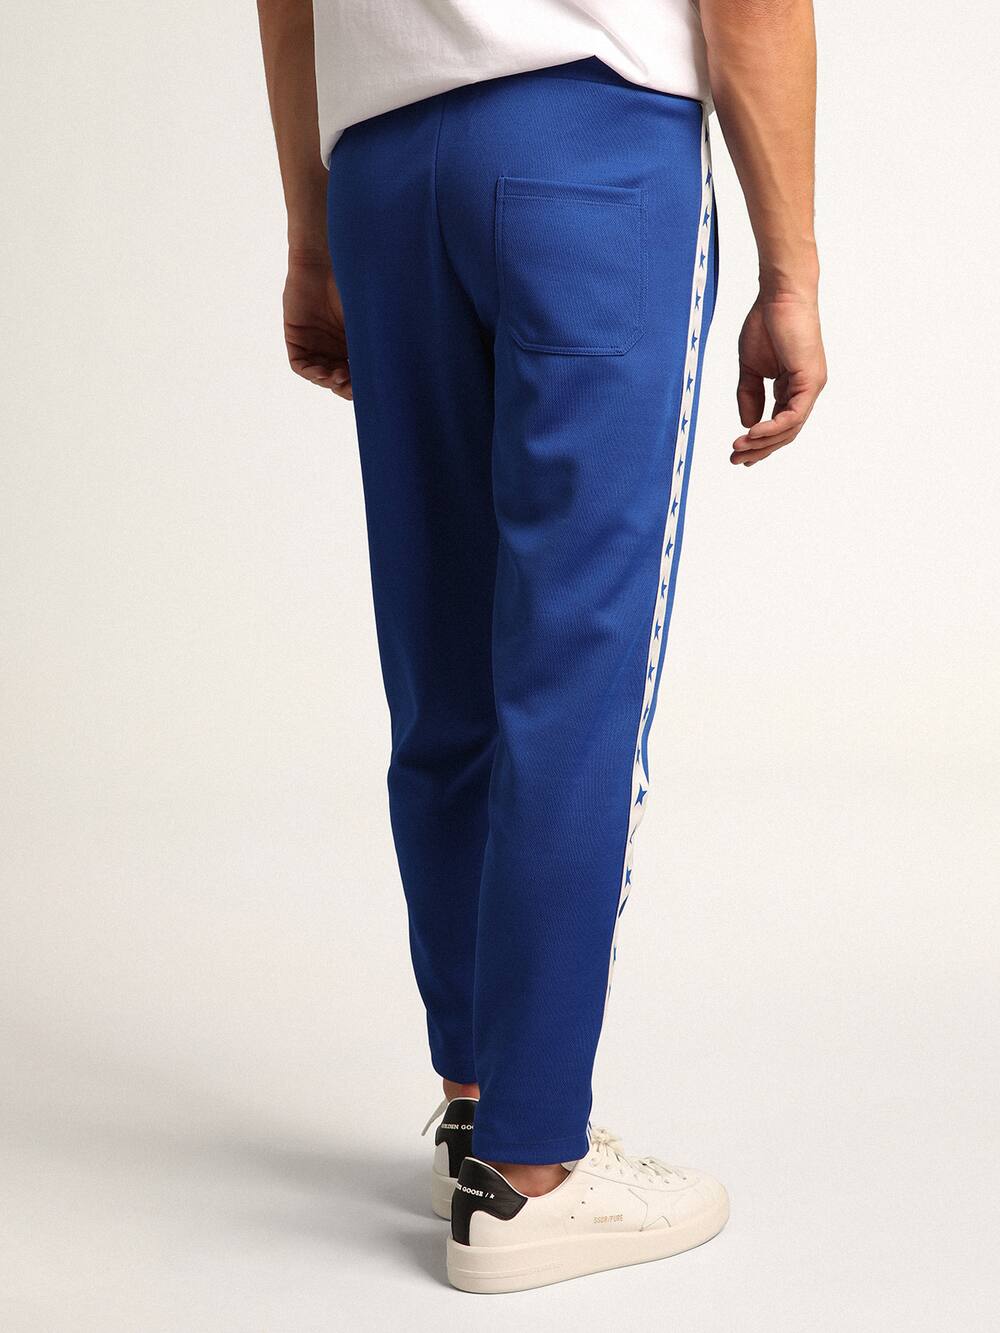 Golden Goose - Men's blue joggers with band and stars on the sides in 